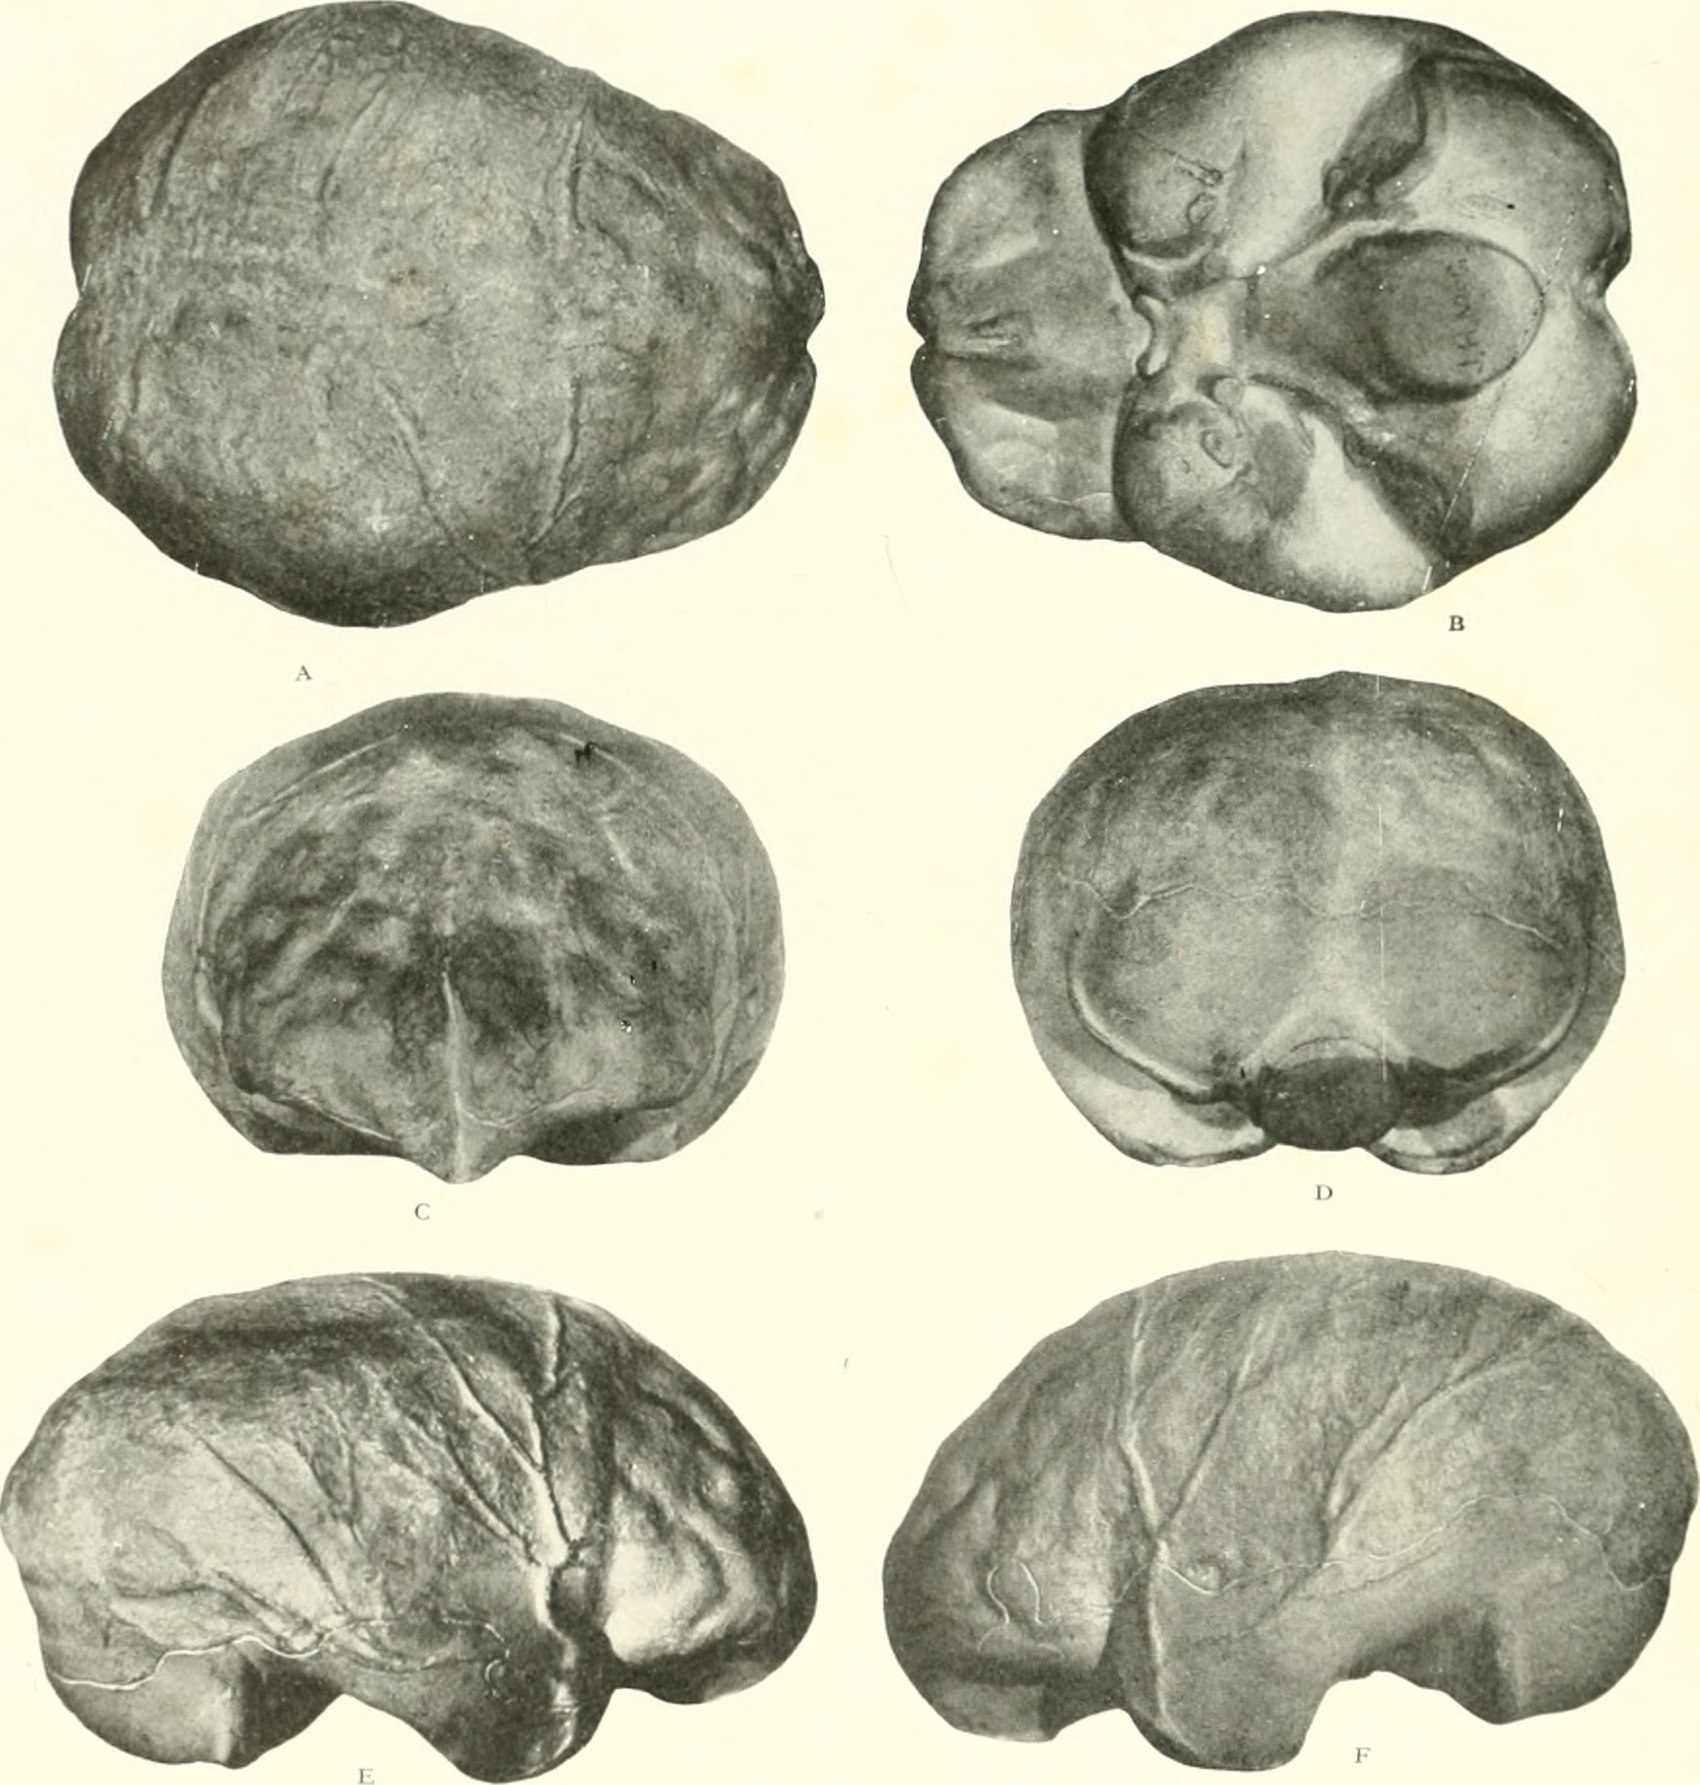 The brain from ape to man; a contribution to the study of the evolution and development of the human brain (1928) (19785429244).jpg